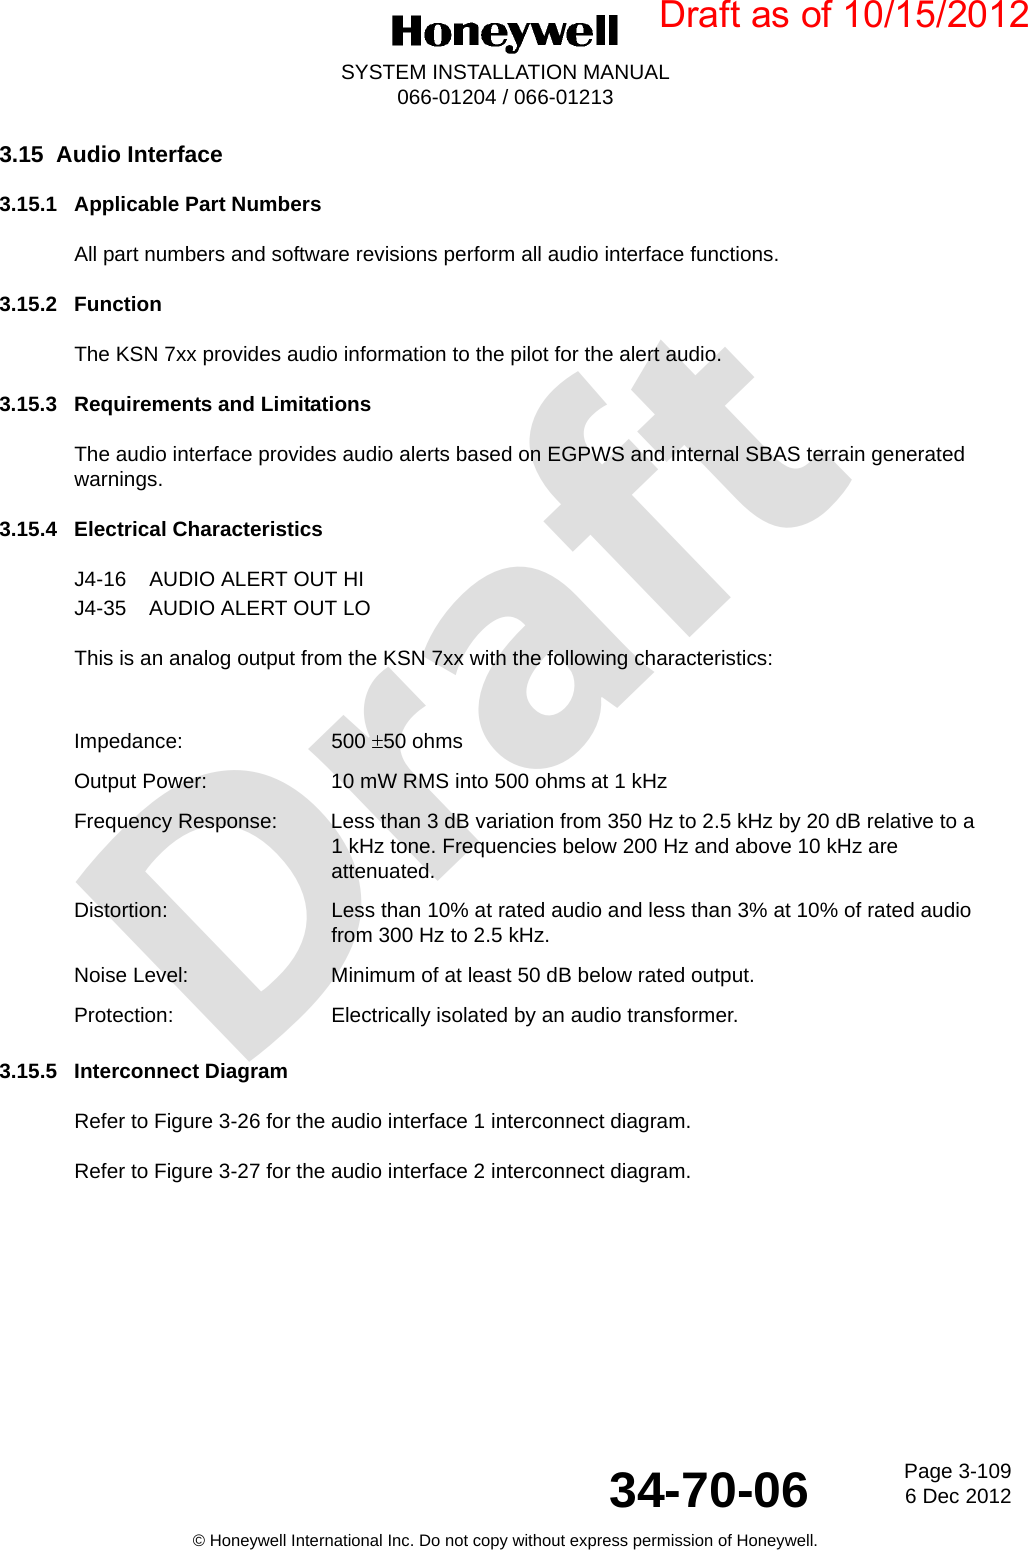 DraftPage 3-1096 Dec 201234-70-06SYSTEM INSTALLATION MANUAL066-01204 / 066-01213© Honeywell International Inc. Do not copy without express permission of Honeywell.3.15 Audio Interface3.15.1 Applicable Part NumbersAll part numbers and software revisions perform all audio interface functions.3.15.2 FunctionThe KSN 7xx provides audio information to the pilot for the alert audio.3.15.3 Requirements and LimitationsThe audio interface provides audio alerts based on EGPWS and internal SBAS terrain generated warnings.3.15.4 Electrical CharacteristicsJ4-16 AUDIO ALERT OUT HIJ4-35 AUDIO ALERT OUT LOThis is an analog output from the KSN 7xx with the following characteristics:3.15.5 Interconnect DiagramRefer to Figure 3-26 for the audio interface 1 interconnect diagram.Refer to Figure 3-27 for the audio interface 2 interconnect diagram.Impedance: 500 50 ohmsOutput Power: 10 mW RMS into 500 ohmsat 1 kHzFrequency Response: Less than 3 dB variation from 350 Hz to 2.5 kHz by 20 dB relative to a 1 kHz tone. Frequencies below 200 Hz and above 10 kHz are attenuated.Distortion: Less than 10% at rated audio and less than 3% at 10% of rated audio from 300 Hz to 2.5 kHz.Noise Level: Minimum of at least 50 dB below rated output.Protection: Electrically isolated by an audio transformer.Draft as of 10/15/2012